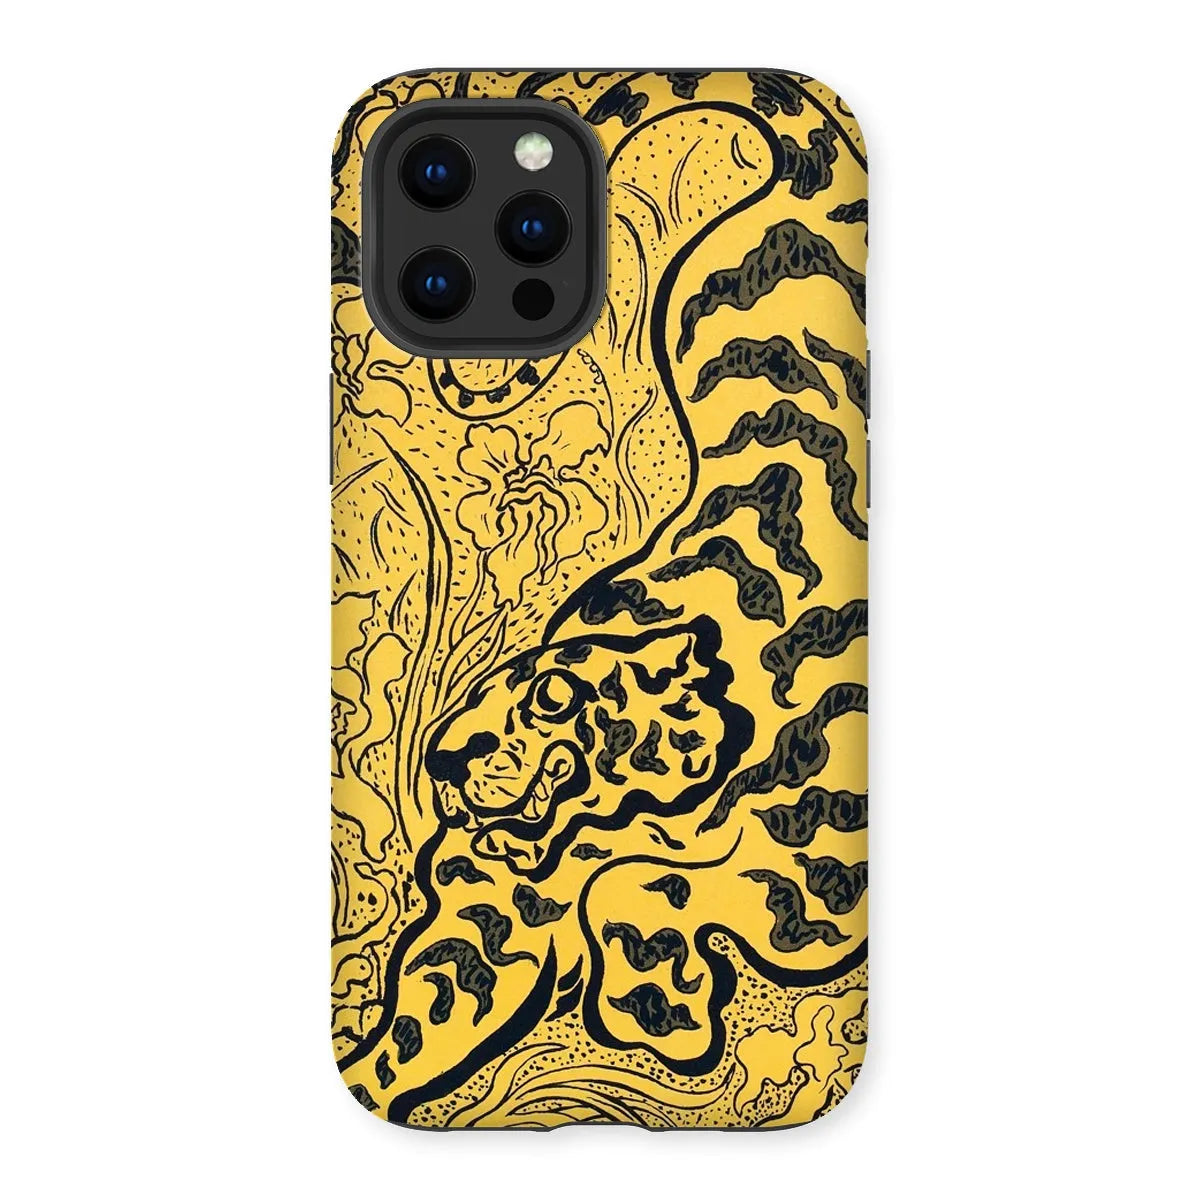 Tiger In The Jungle - Graphic Art Phone Case - Paul Ranson - Iphone 12 Pro Max / Matte - Mobile Phone Cases - Aesthetic